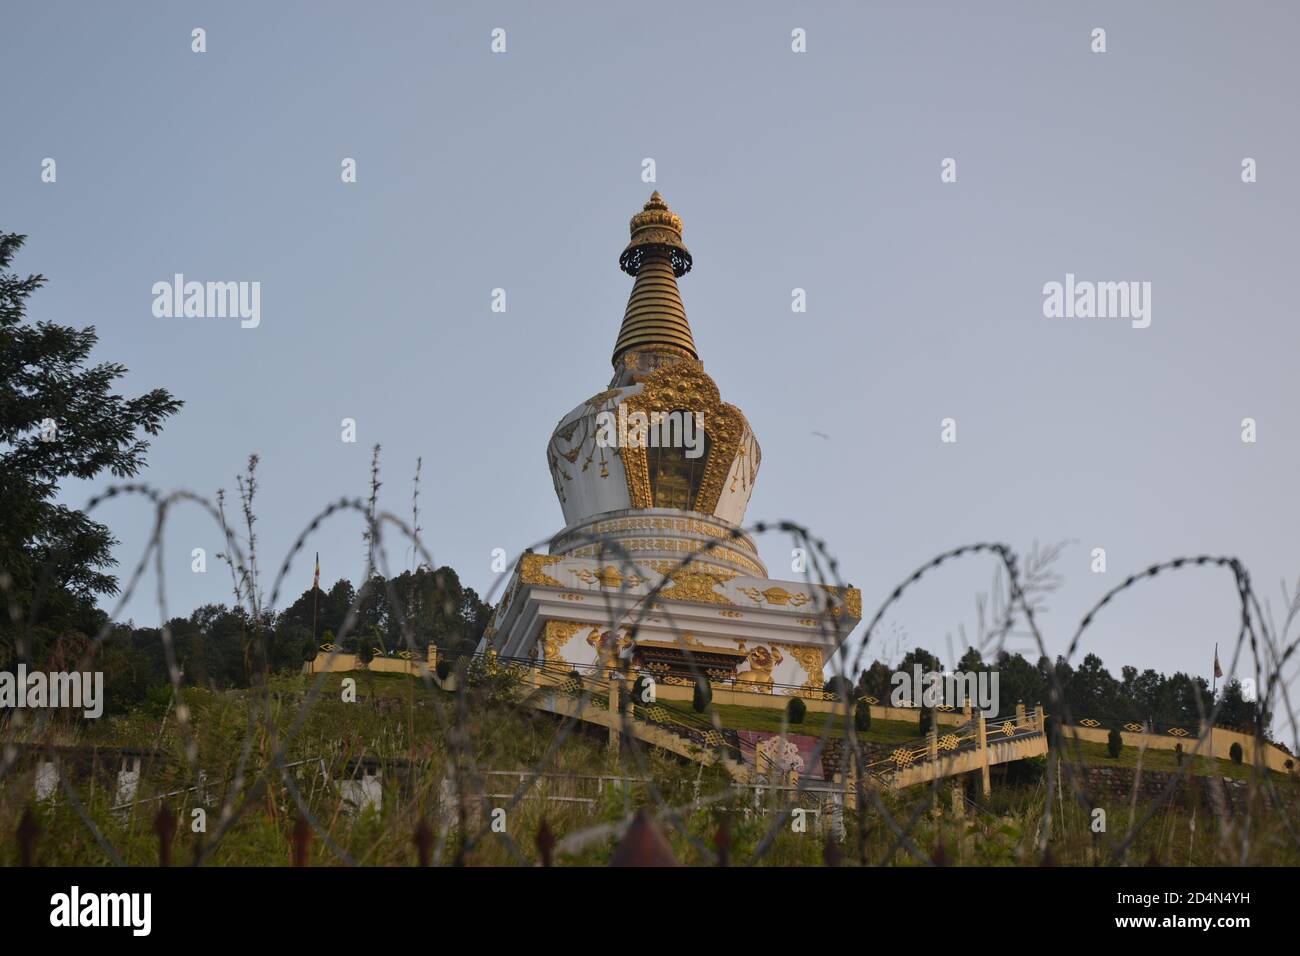 A buddhist school called gumba. The picture is of gumba named 'chiseni' in the hills of Kathmandu, Nepal. It's a beautiful place for tourism. Stock Photo